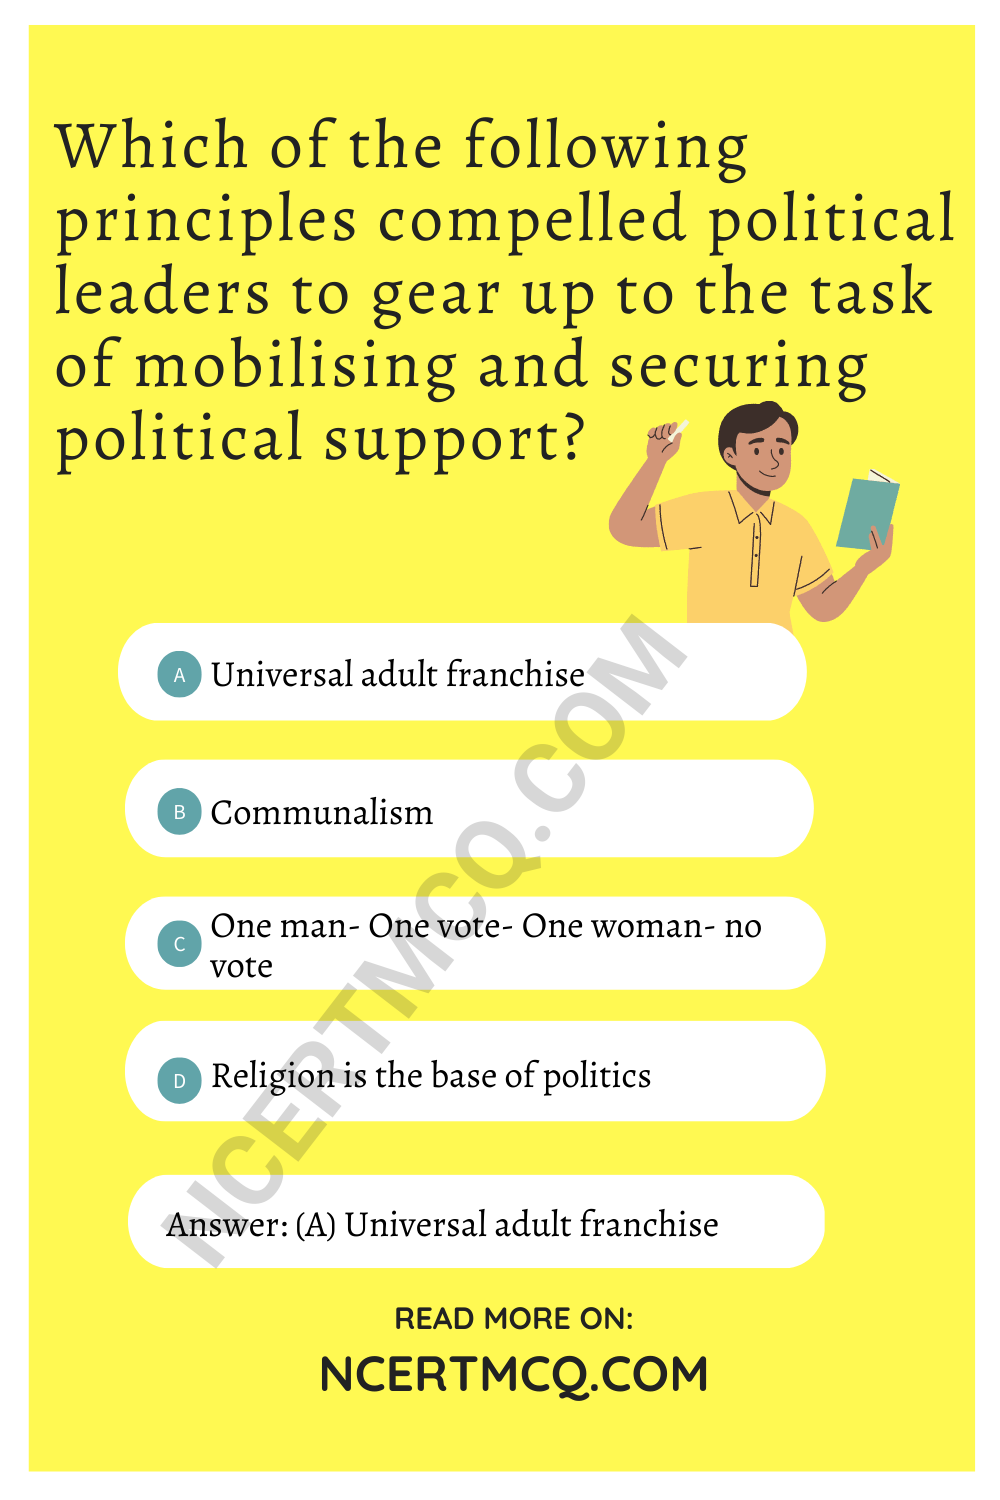 Which of the following principles compelled political leaders to gear up to the task of mobilising and securing political support?